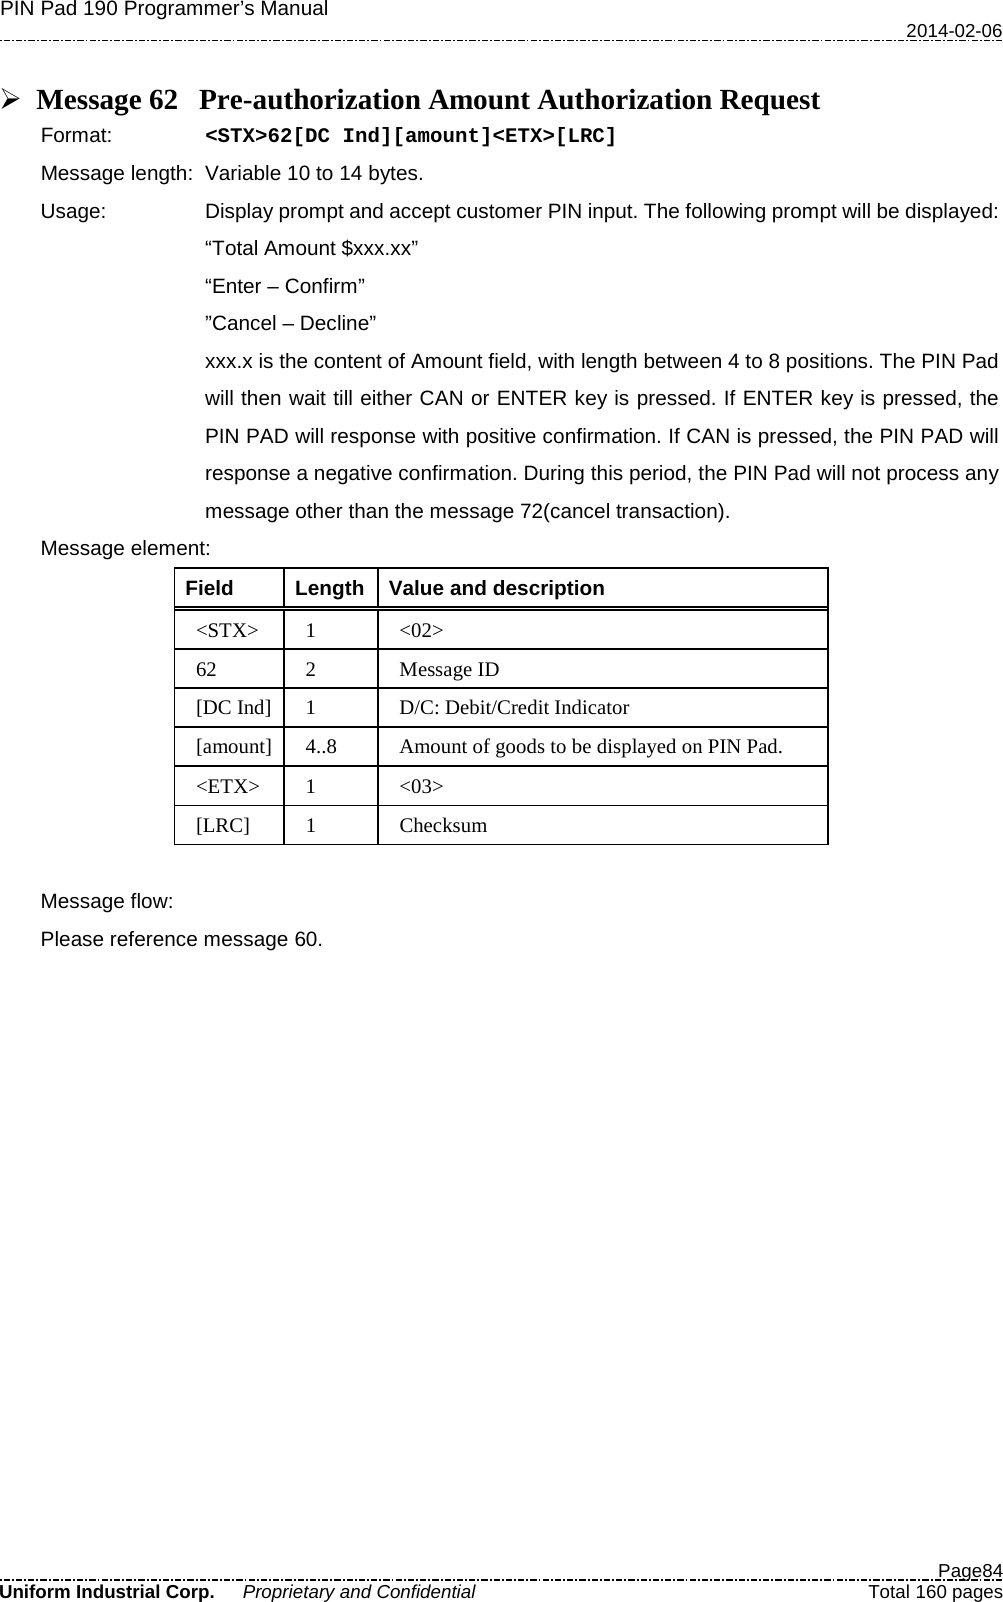 PIN Pad 190 Programmer’s Manual   2014-02-06  Page84 Uniform Industrial Corp. Proprietary and Confidential  Total 160 pages   Message 62 Pre-authorization Amount Authorization Request Format:   &lt;STX&gt;62[DC Ind][amount]&lt;ETX&gt;[LRC] Message length: Variable 10 to 14 bytes. Usage: Display prompt and accept customer PIN input. The following prompt will be displayed:  “Total Amount $xxx.xx” “Enter – Confirm” ”Cancel – Decline”  xxx.x is the content of Amount field, with length between 4 to 8 positions. The PIN Pad will then wait till either CAN or ENTER key is pressed. If ENTER key is pressed, the PIN PAD will response with positive confirmation. If CAN is pressed, the PIN PAD will response a negative confirmation. During this period, the PIN Pad will not process any message other than the message 72(cancel transaction). Message element:   Field  Length  Value and description &lt;STX&gt;  1  &lt;02&gt; 62  2  Message ID [DC Ind]  1  D/C: Debit/Credit Indicator [amount]  4..8  Amount of goods to be displayed on PIN Pad. &lt;ETX&gt;  1  &lt;03&gt; [LRC]  1  Checksum  Message flow: Please reference message 60. 